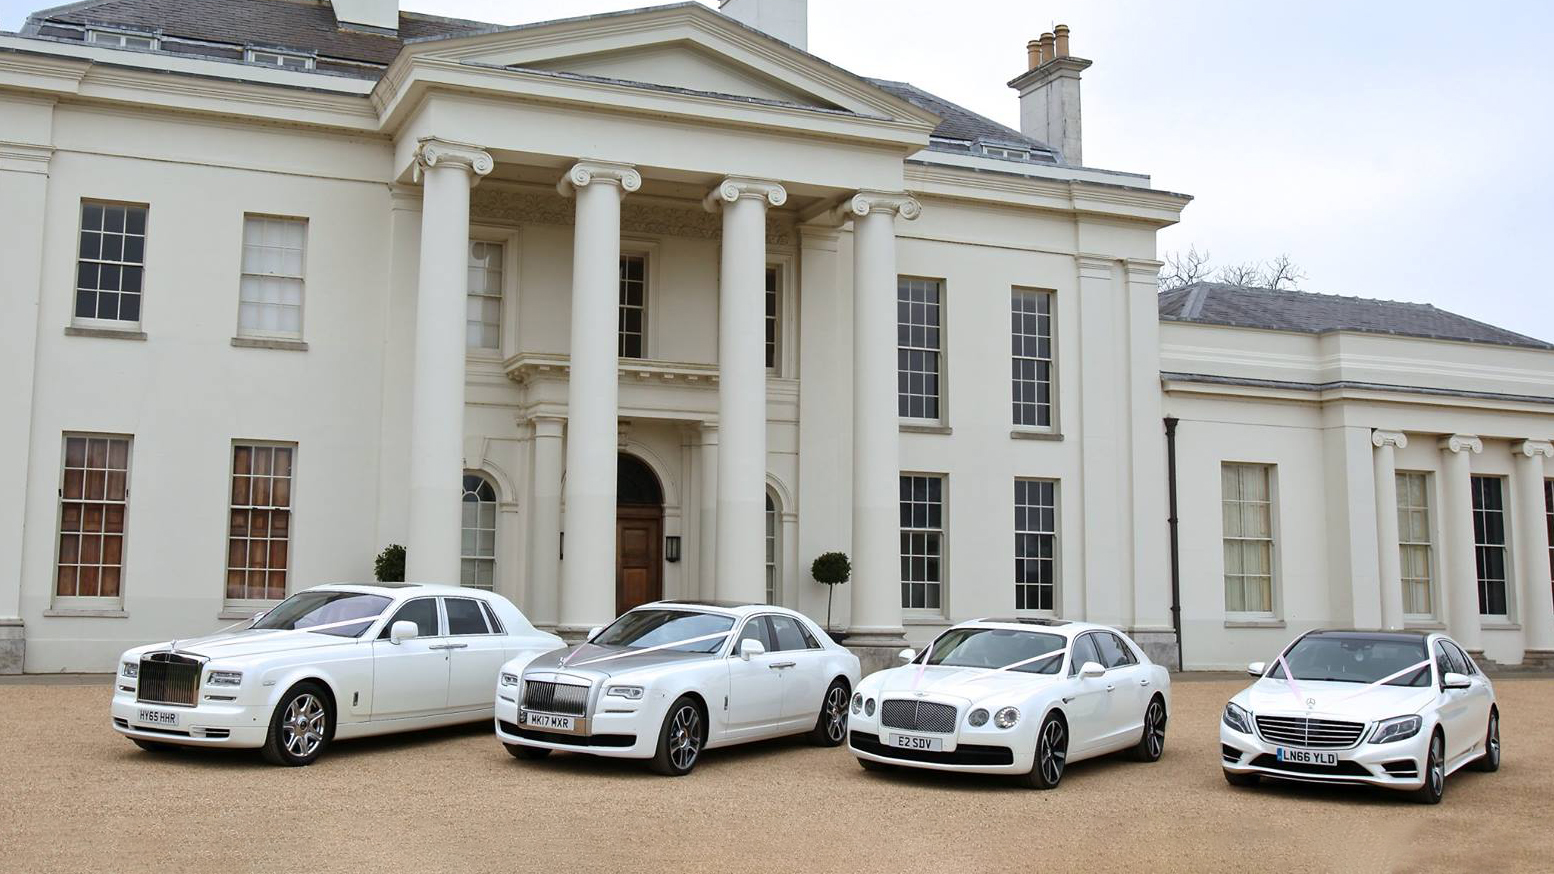 A selection of white Luxurious and modern vehicles all decorated with matching white ribbons on wedding duties in Peterborough. Frot Left to right: Rolls-Royce Phantom, Rolls-Royce